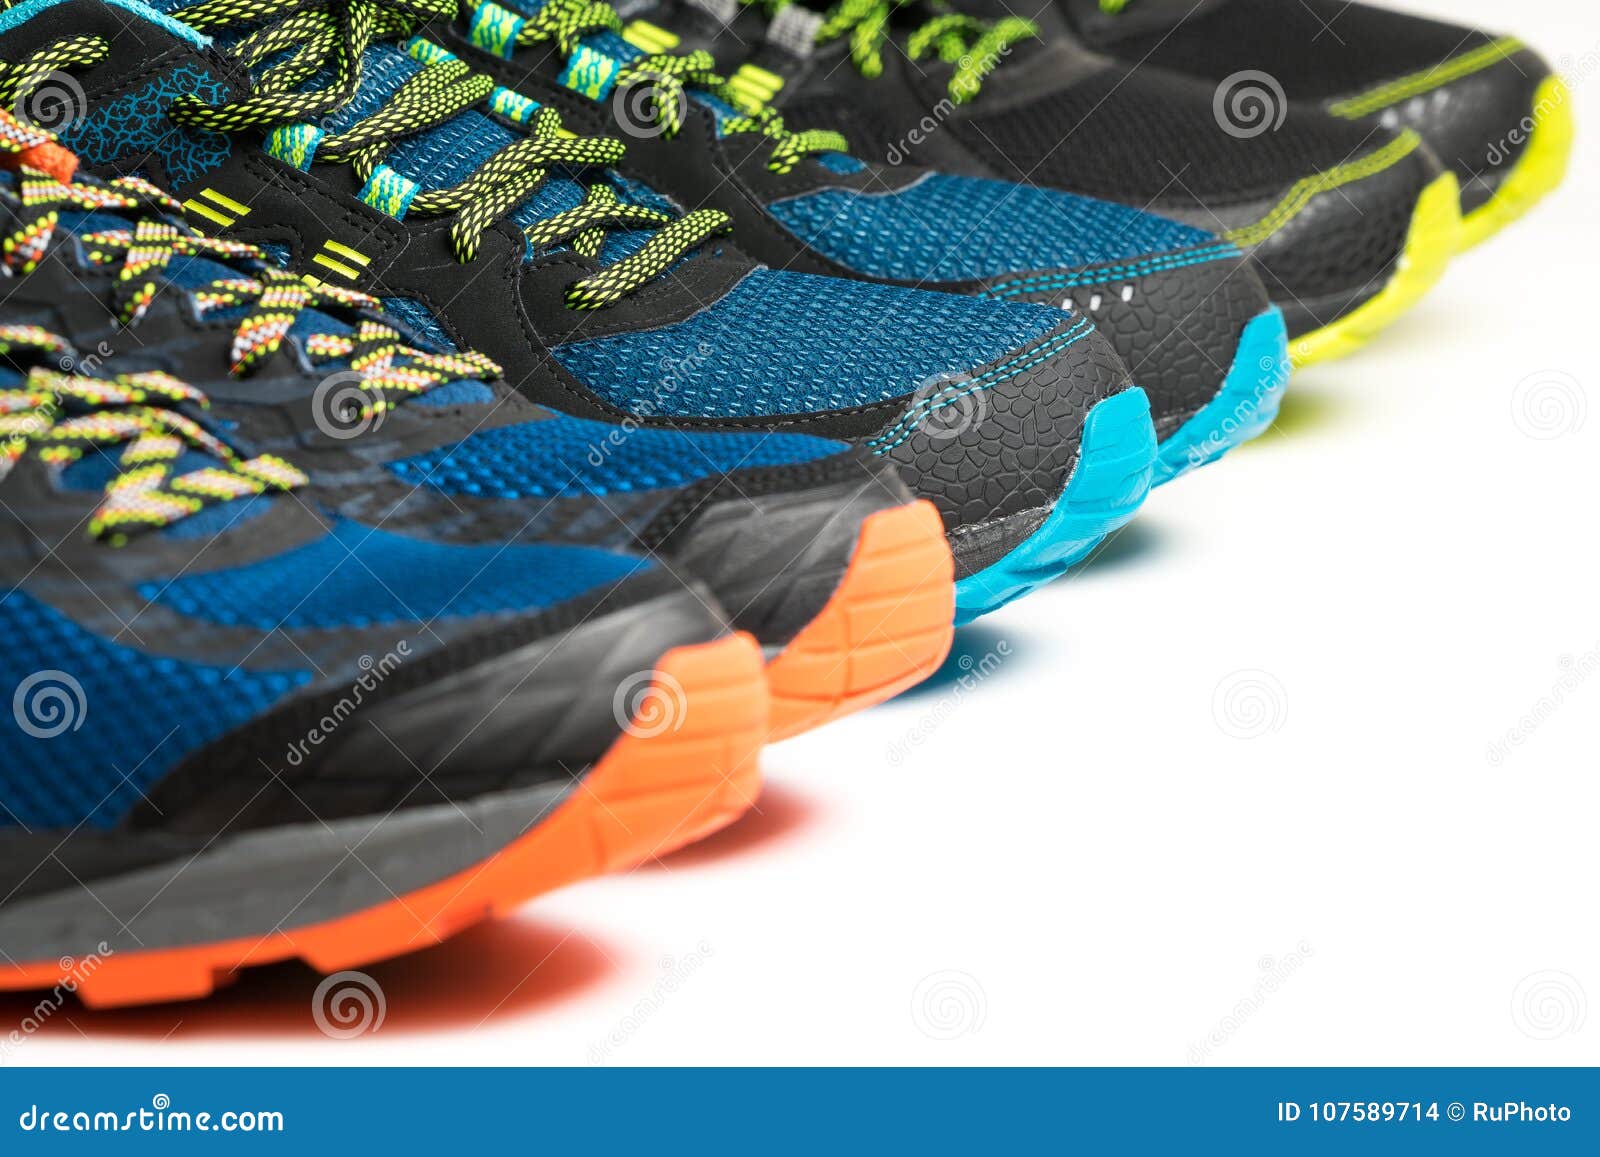 colourful sports shoes